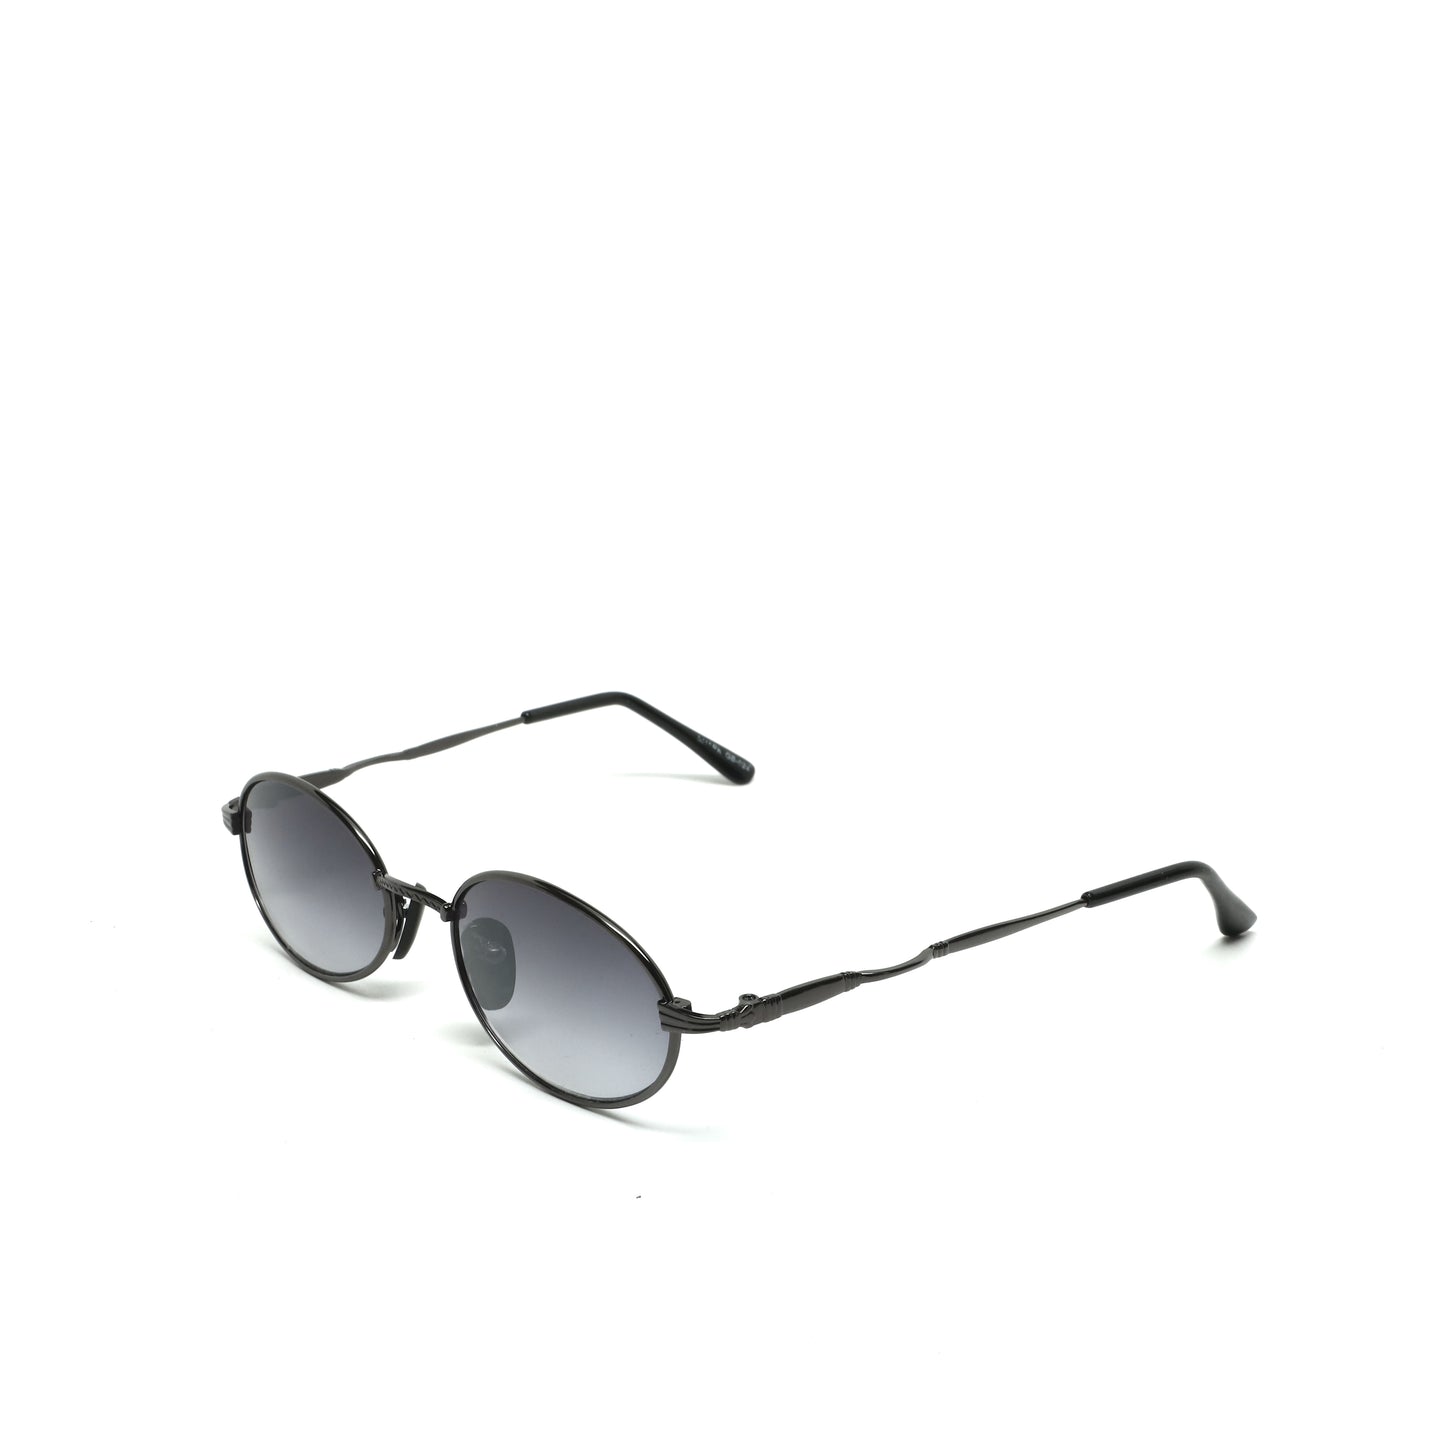 //Style 24// 90s Standard Wire Oval Sunglasses - Grey